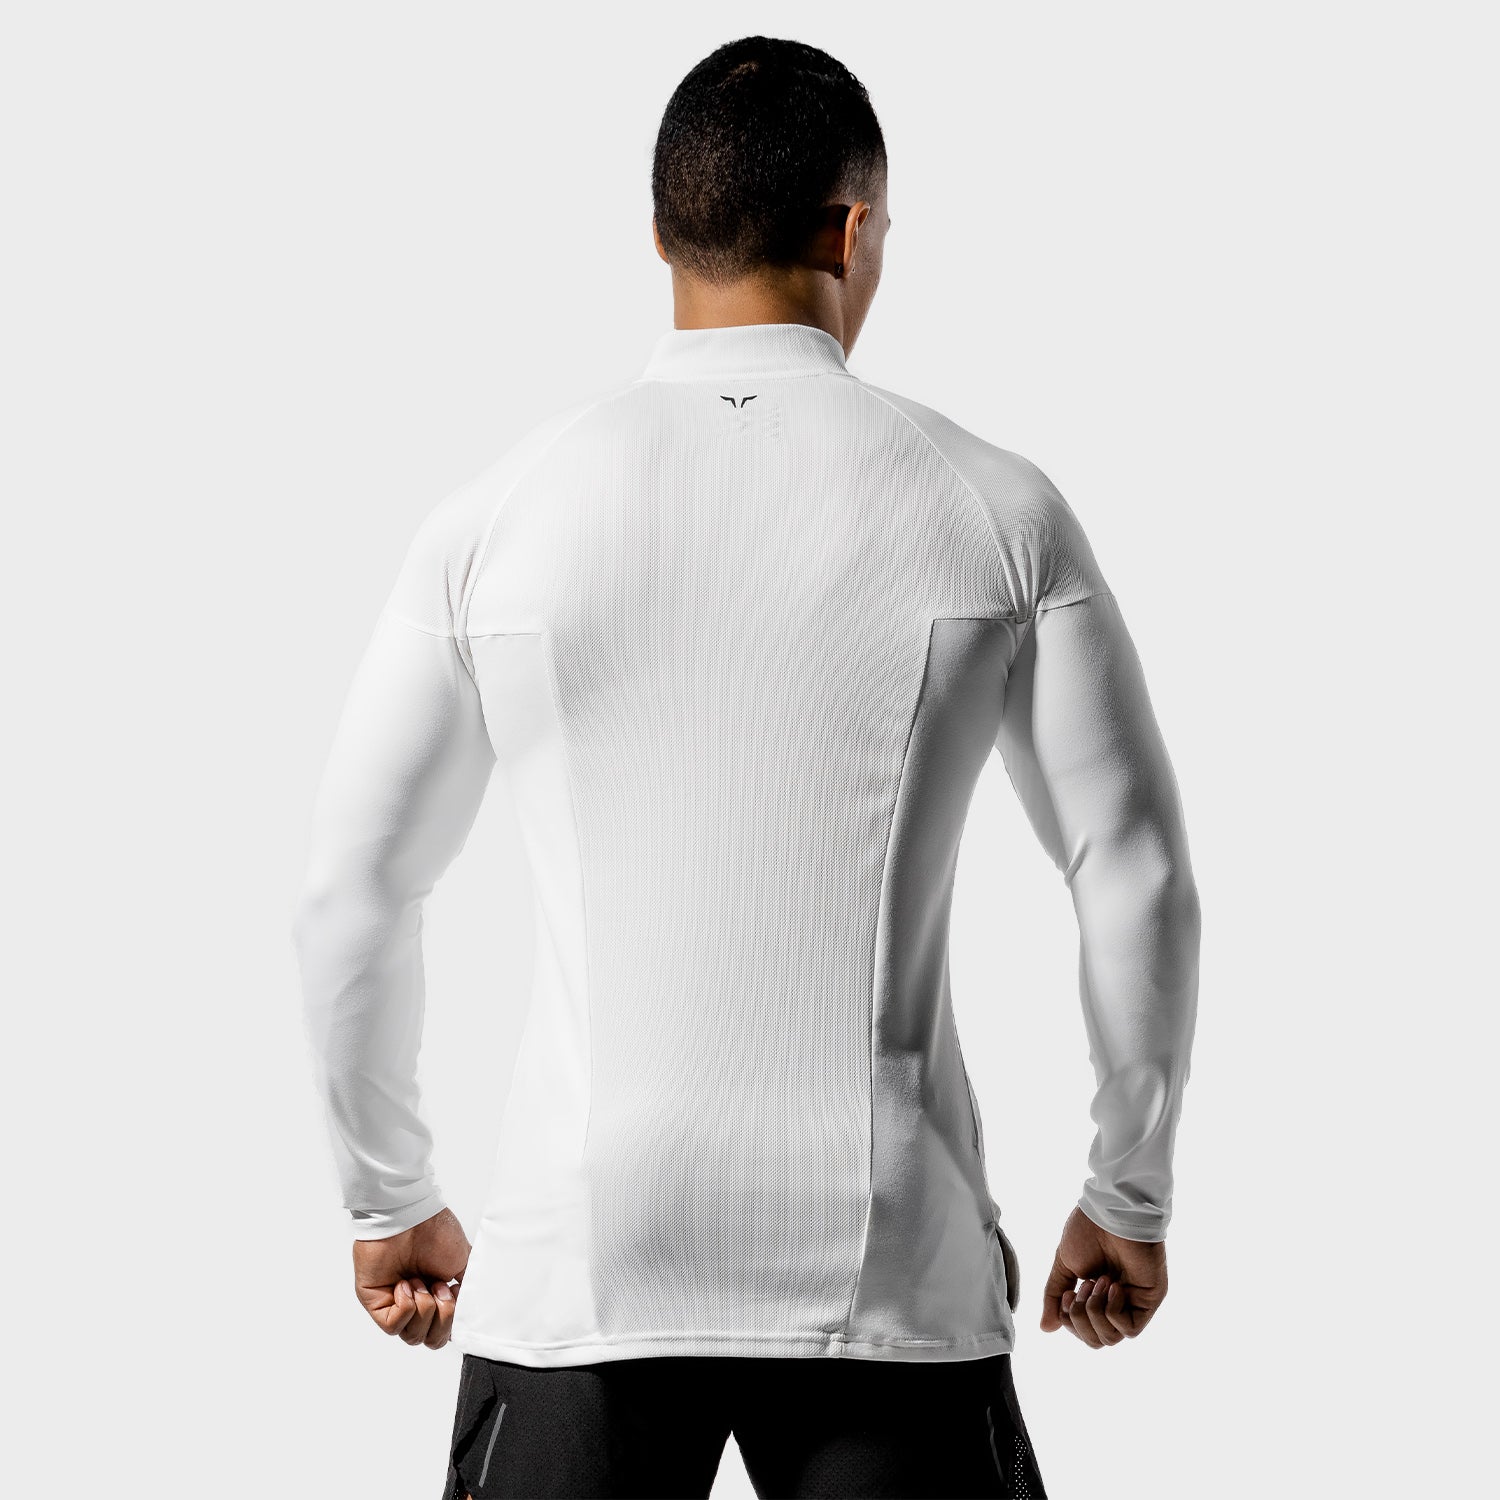 squatwolf-running-tops-for-men-core-running-top-white-long-sleeves-gym-wear